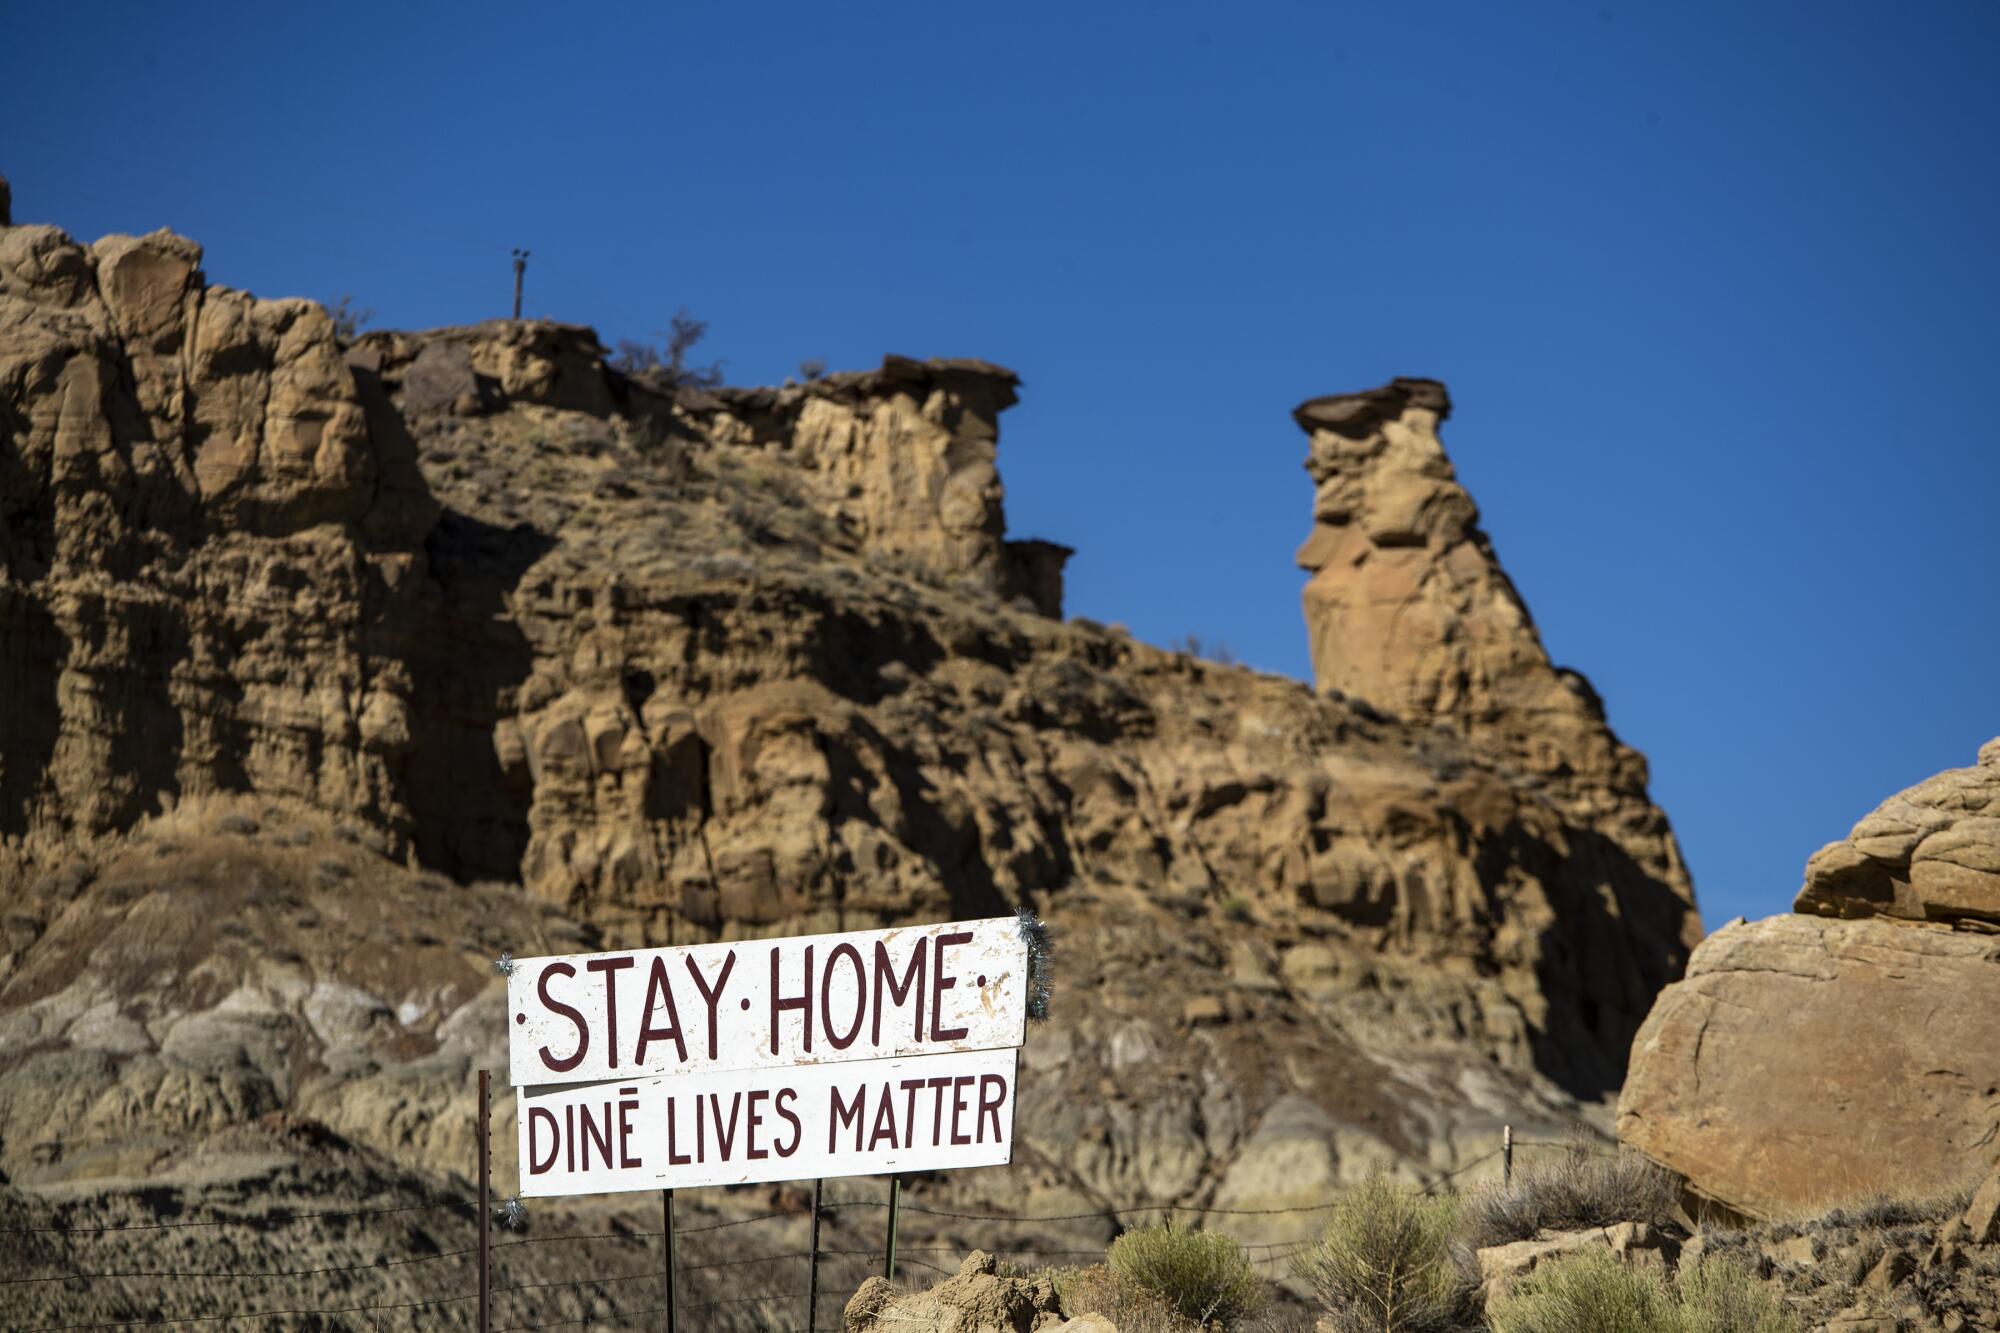 Sign saying "Stay Home, Diné Lives Matter" posted in front of a rock formation.